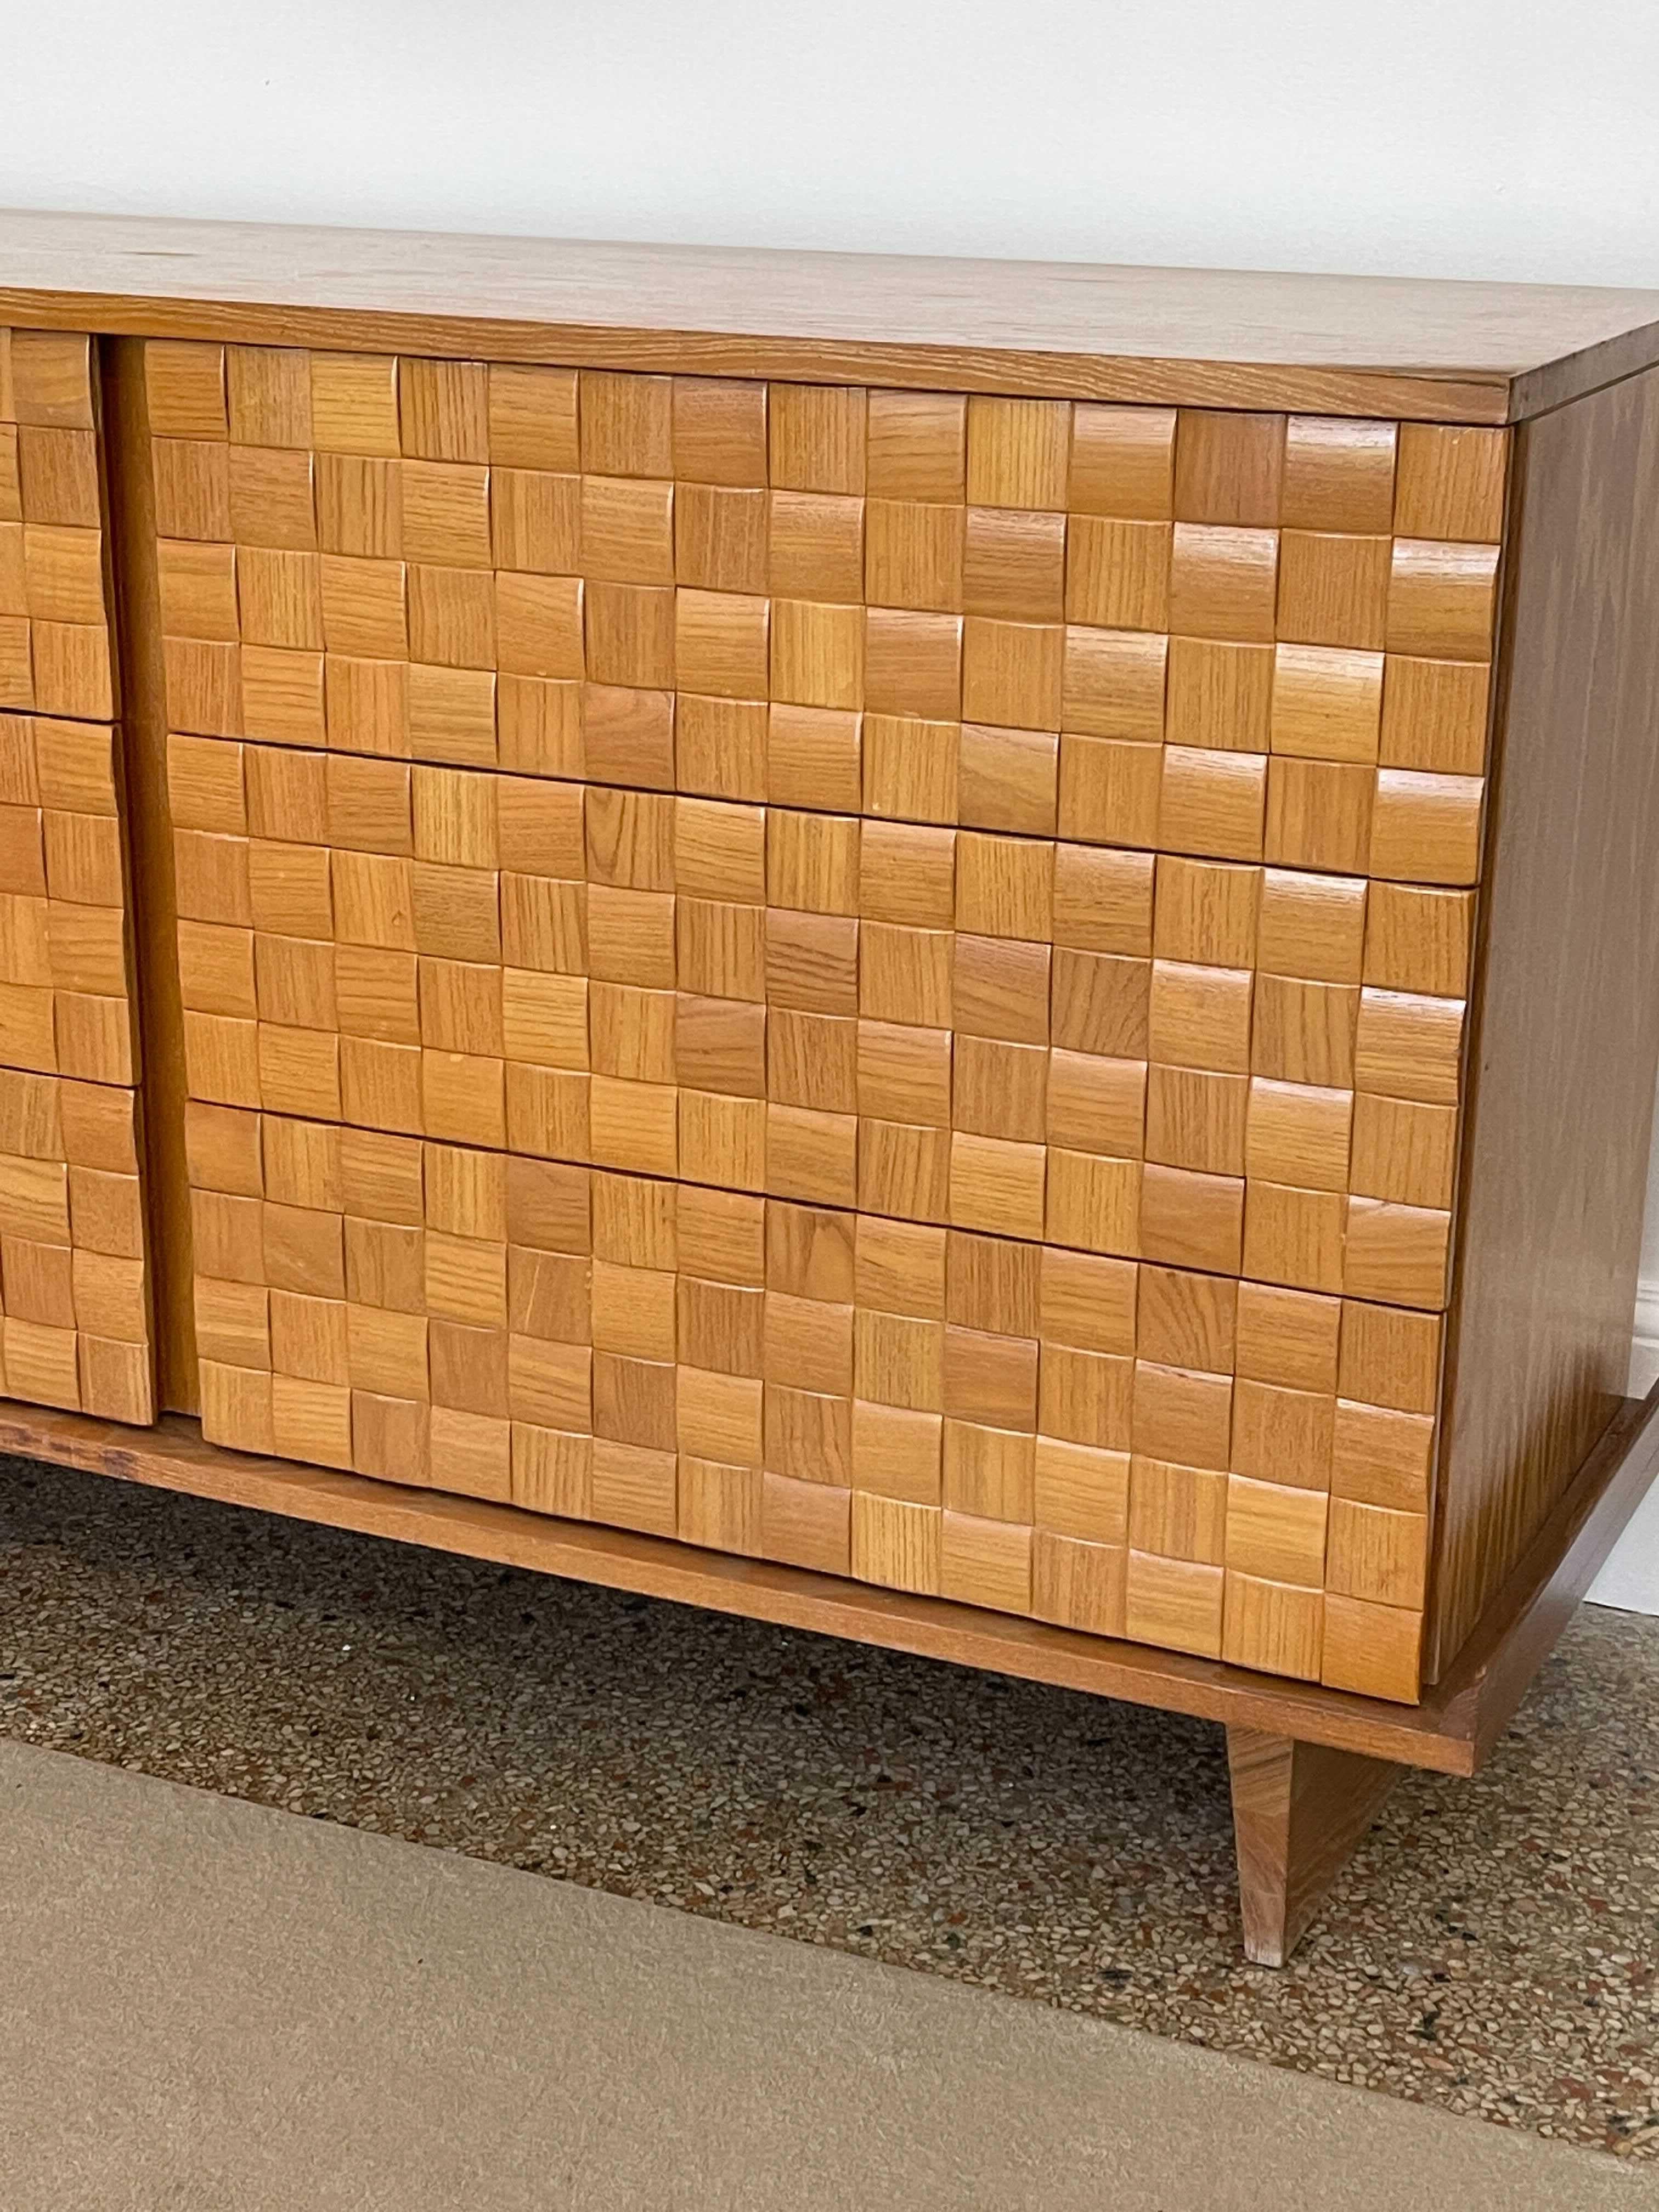 A double dresser / chest of drawers / cabinet. Designed by Paul László for Brown Saltman, 1950s, America. Marked

Paul László is considered among the most important California-based interior designer/architects of all time. At the height of his